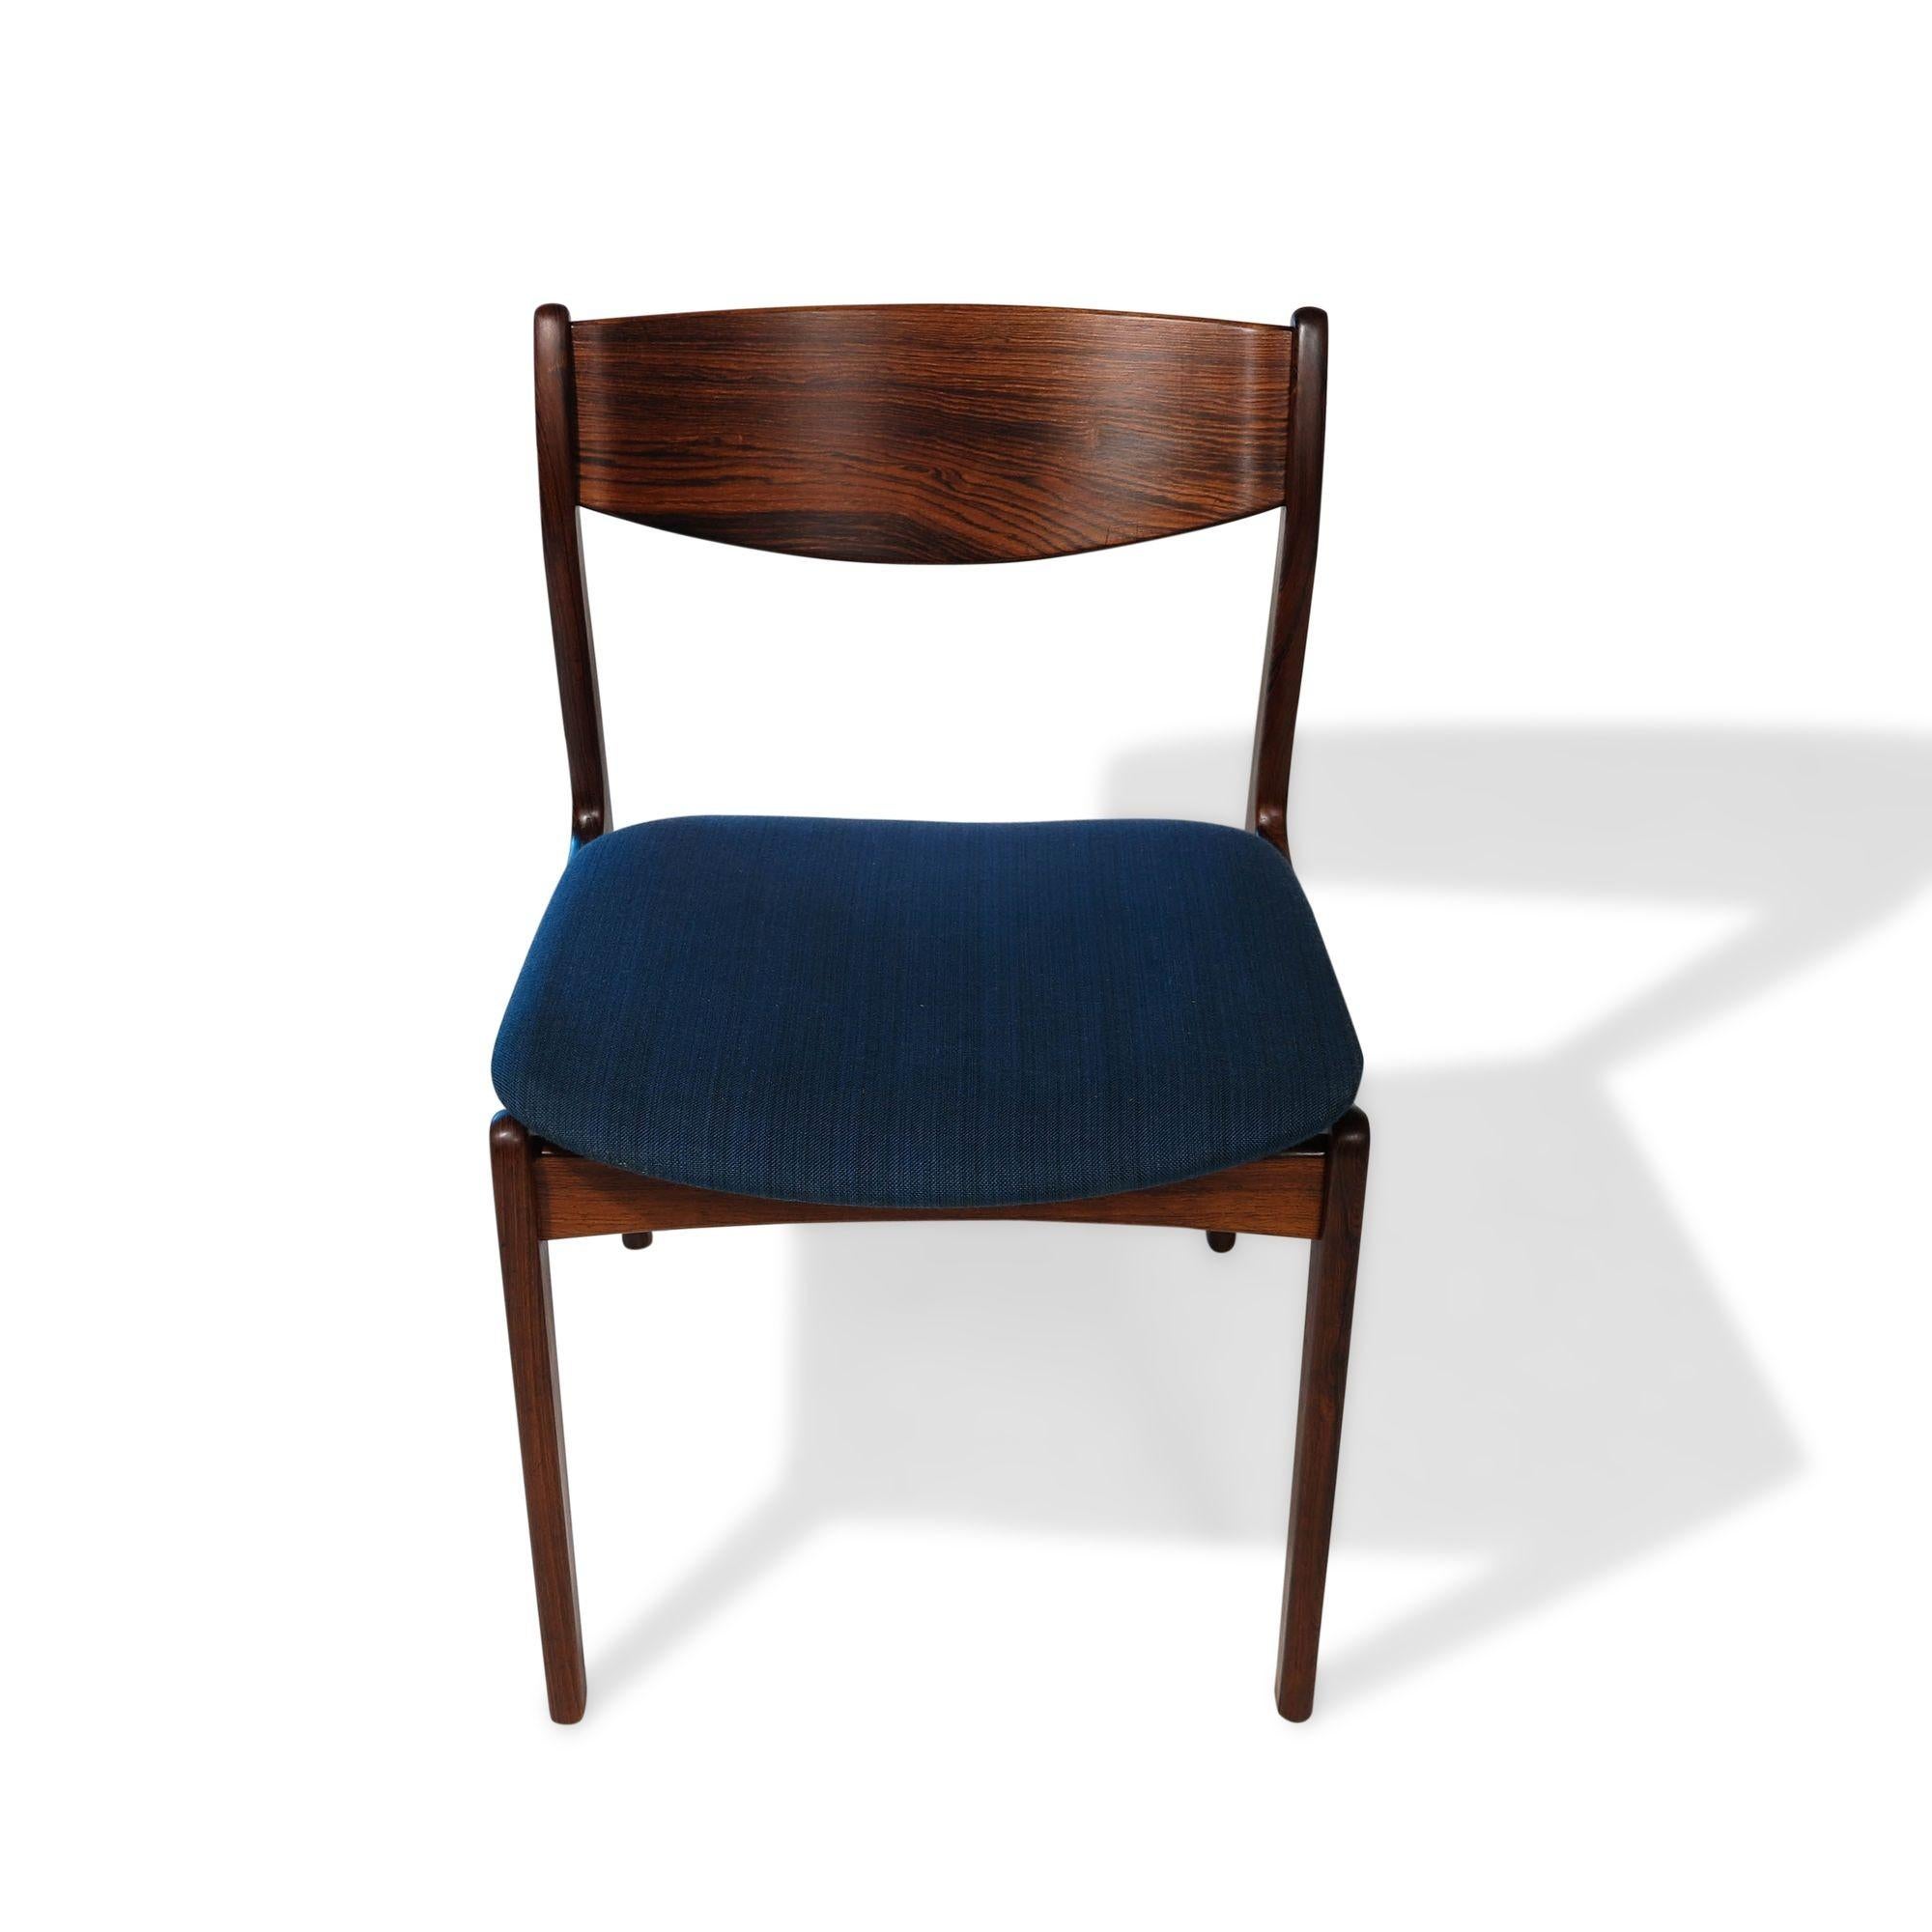 Set of six mid-century Danish dining chairs designed by P.E. Jorgensen for Farso Stolefarik, 1955, Denmark. The chairs are crafted of Brazilian rosewood with dark figured grains, comfortable backrests, and upholstered in the original blue wool